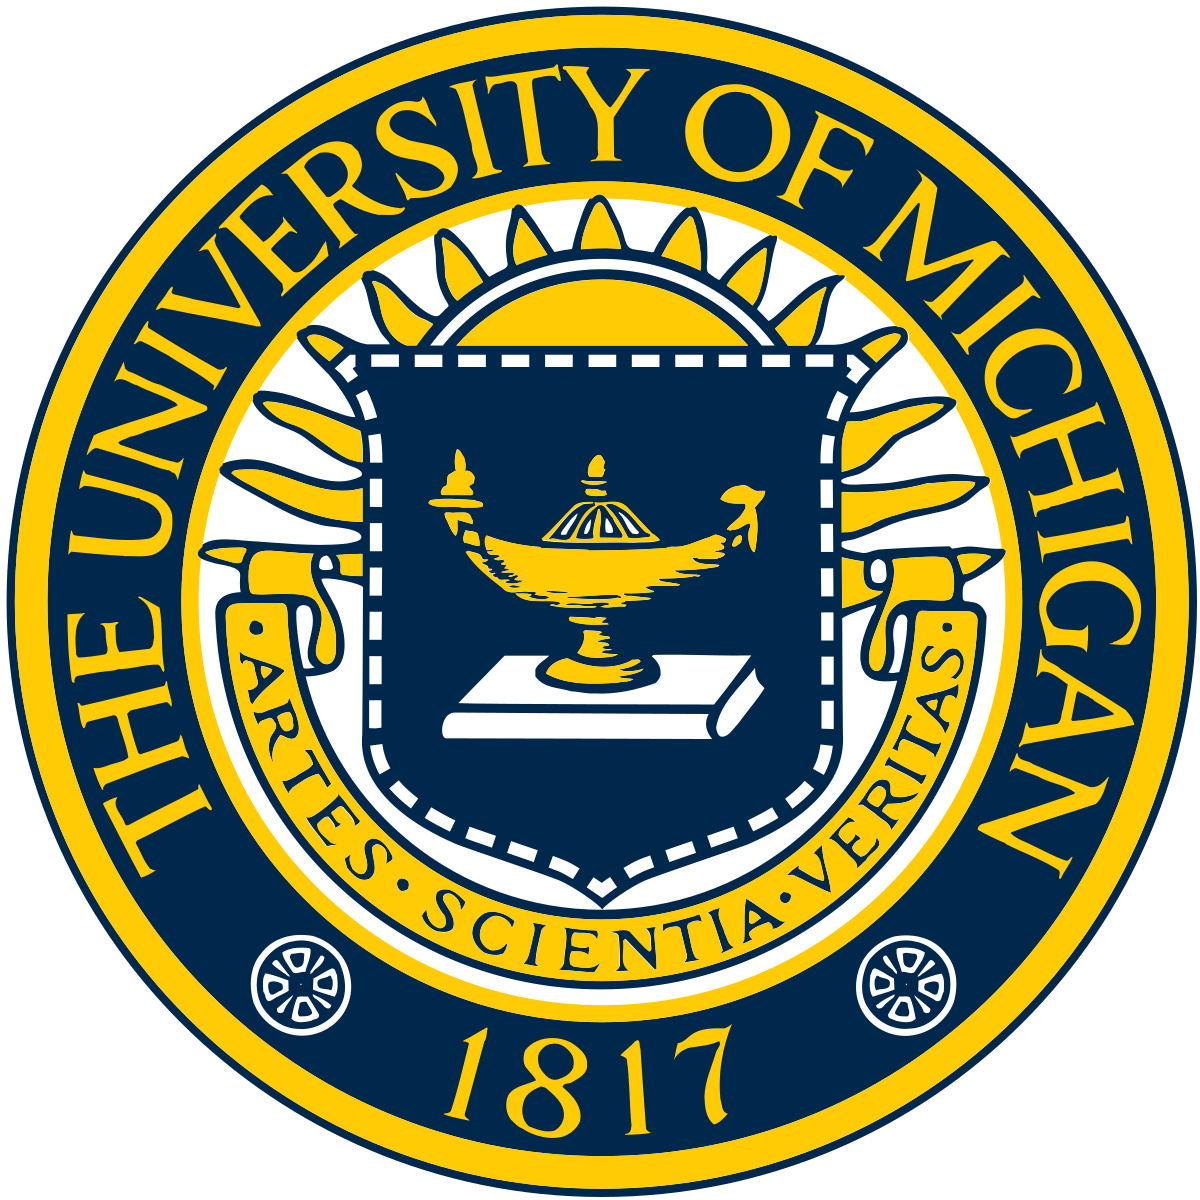 Bachelor of Science in in Computational Science, Michigan University